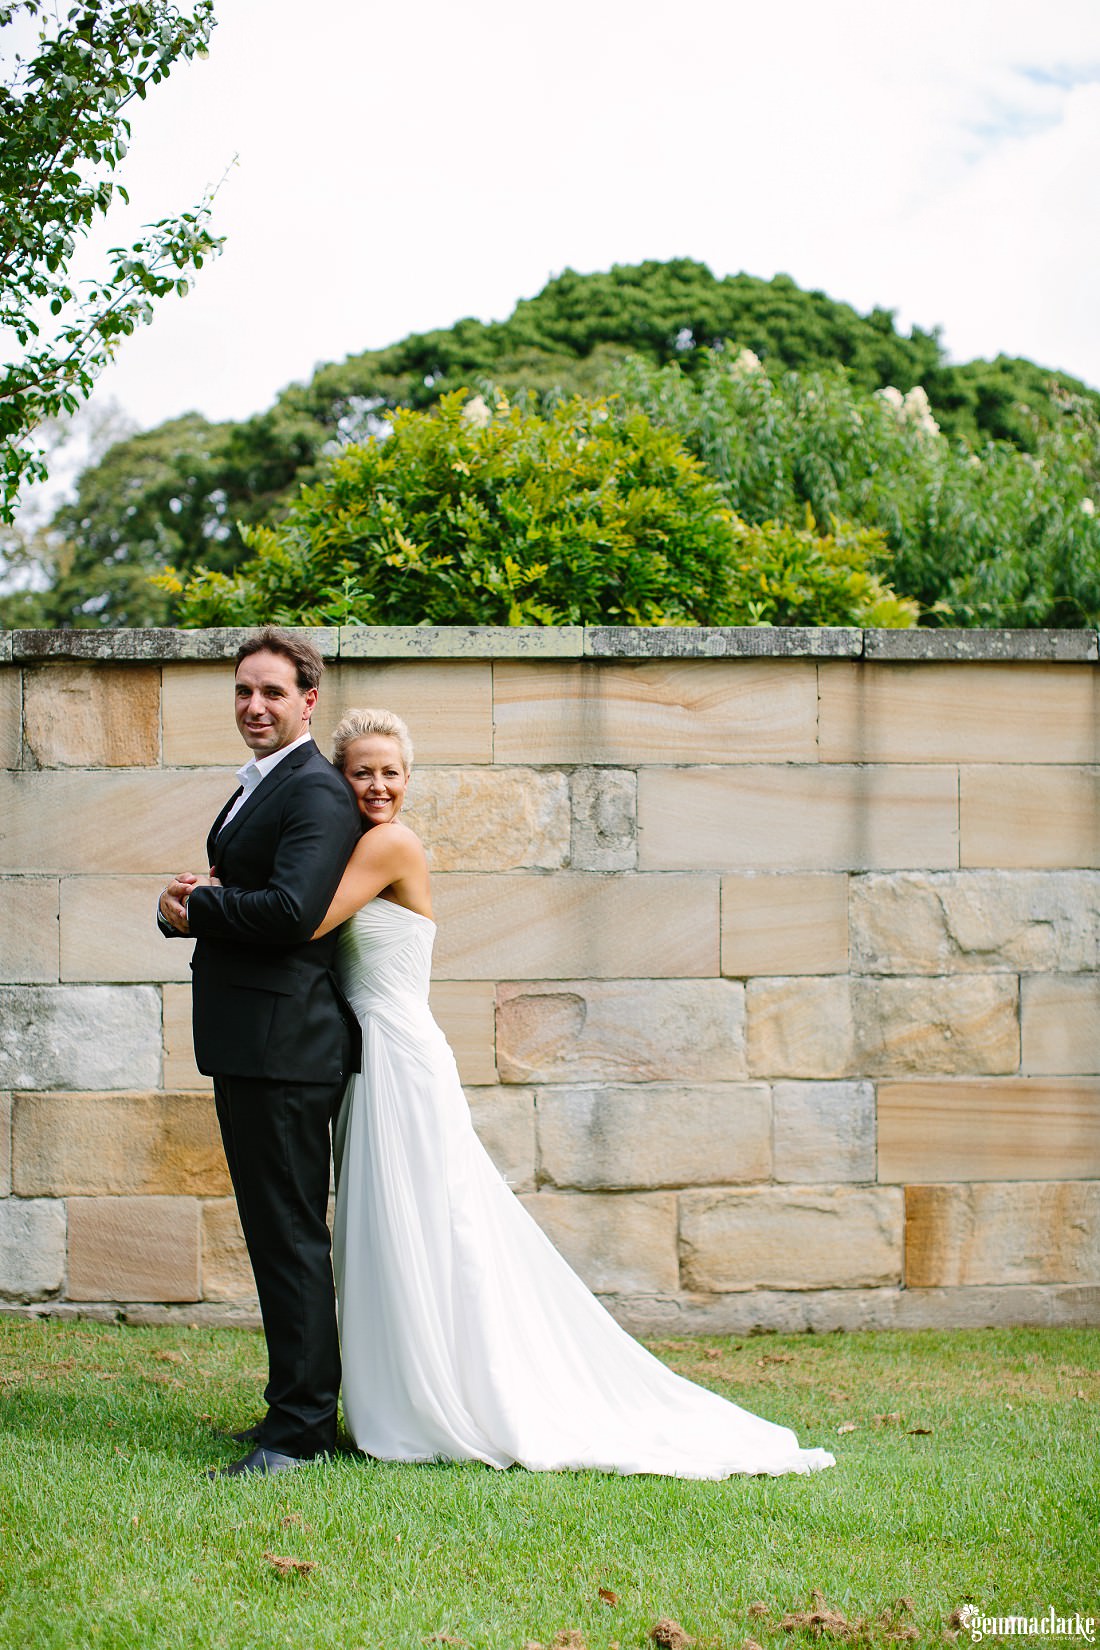 A bride stands behind her groom and holds him around the waist as they stand in front of a sandstone wall - Lion Gate Lodge Wedding